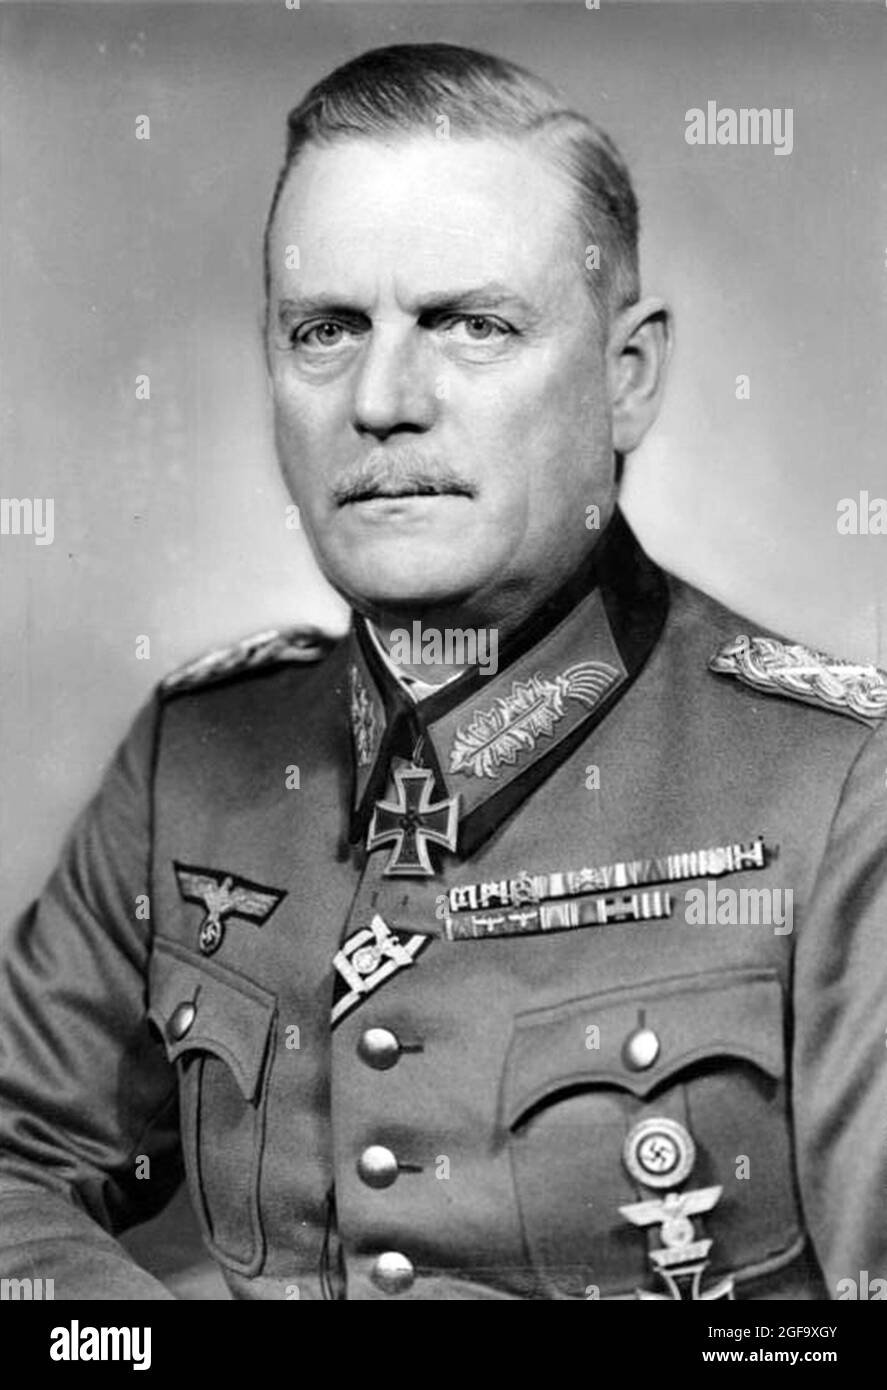 A portrait of German army Chief of the Armed Forces Wilhelm Keitel. He was captured in 1945, tried and hanged at Nuremberg in 1946. Credit: German Bundesarchiv Stock Photo